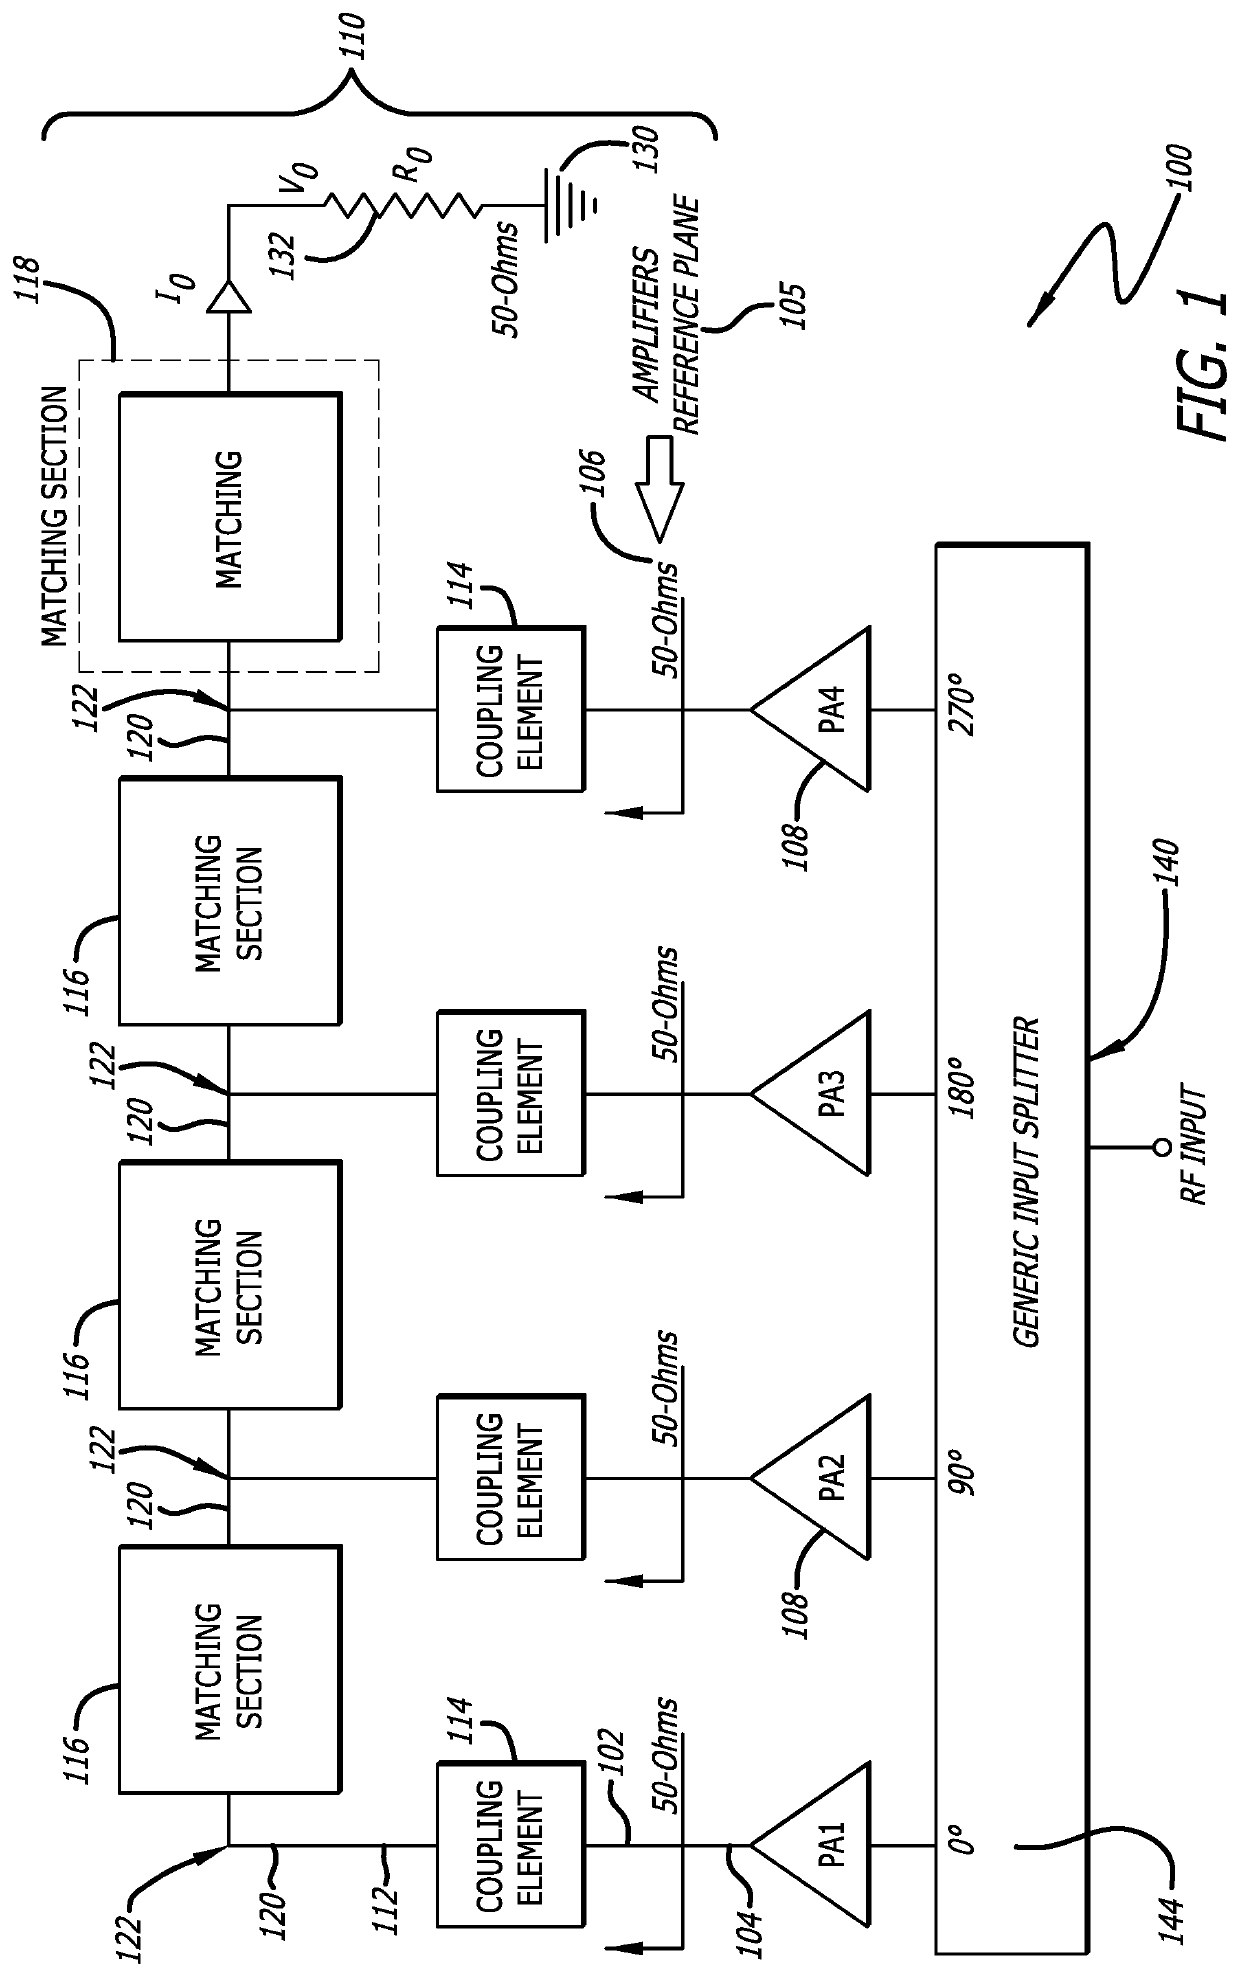 Microwave and radio frequency (RF) power electronics system having power combiner circuit